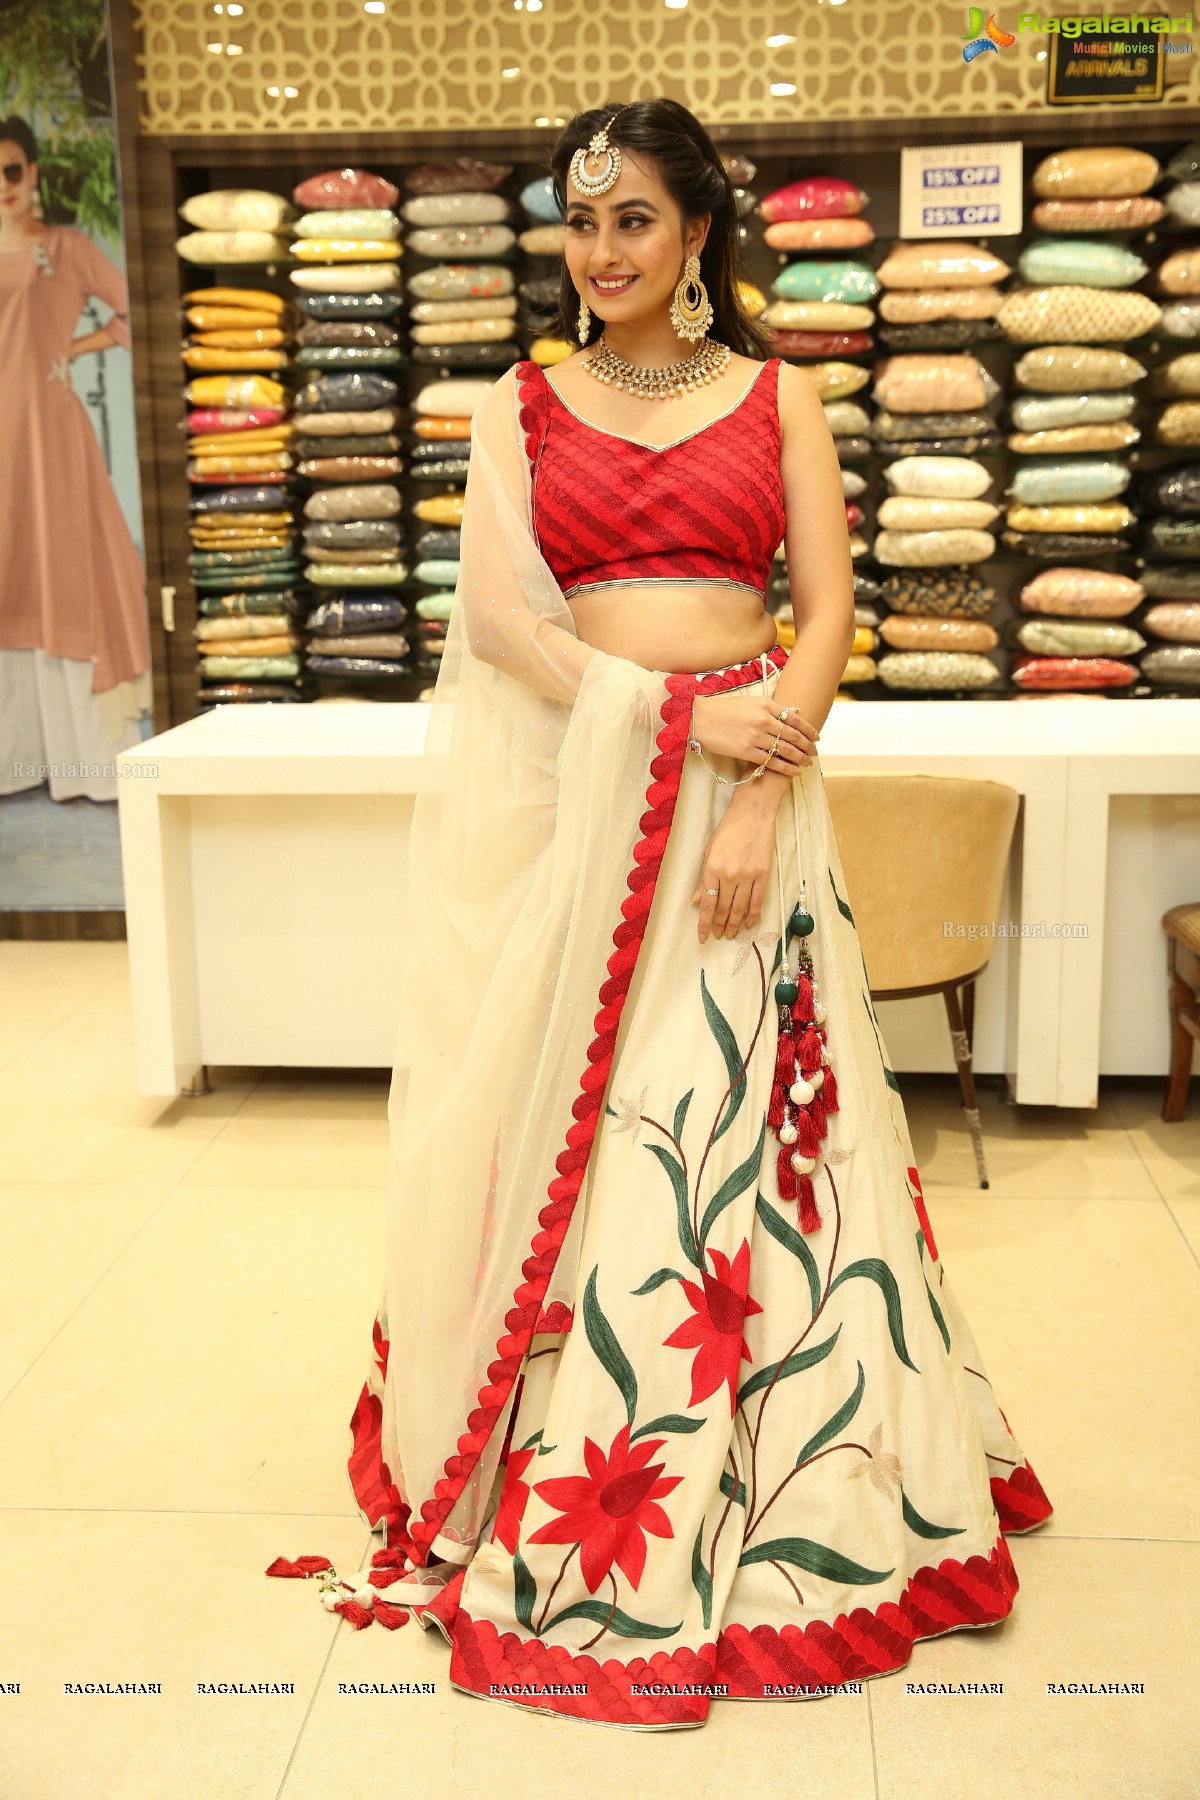 Neeru's India Launches 2019 Wedding & Festival Collection